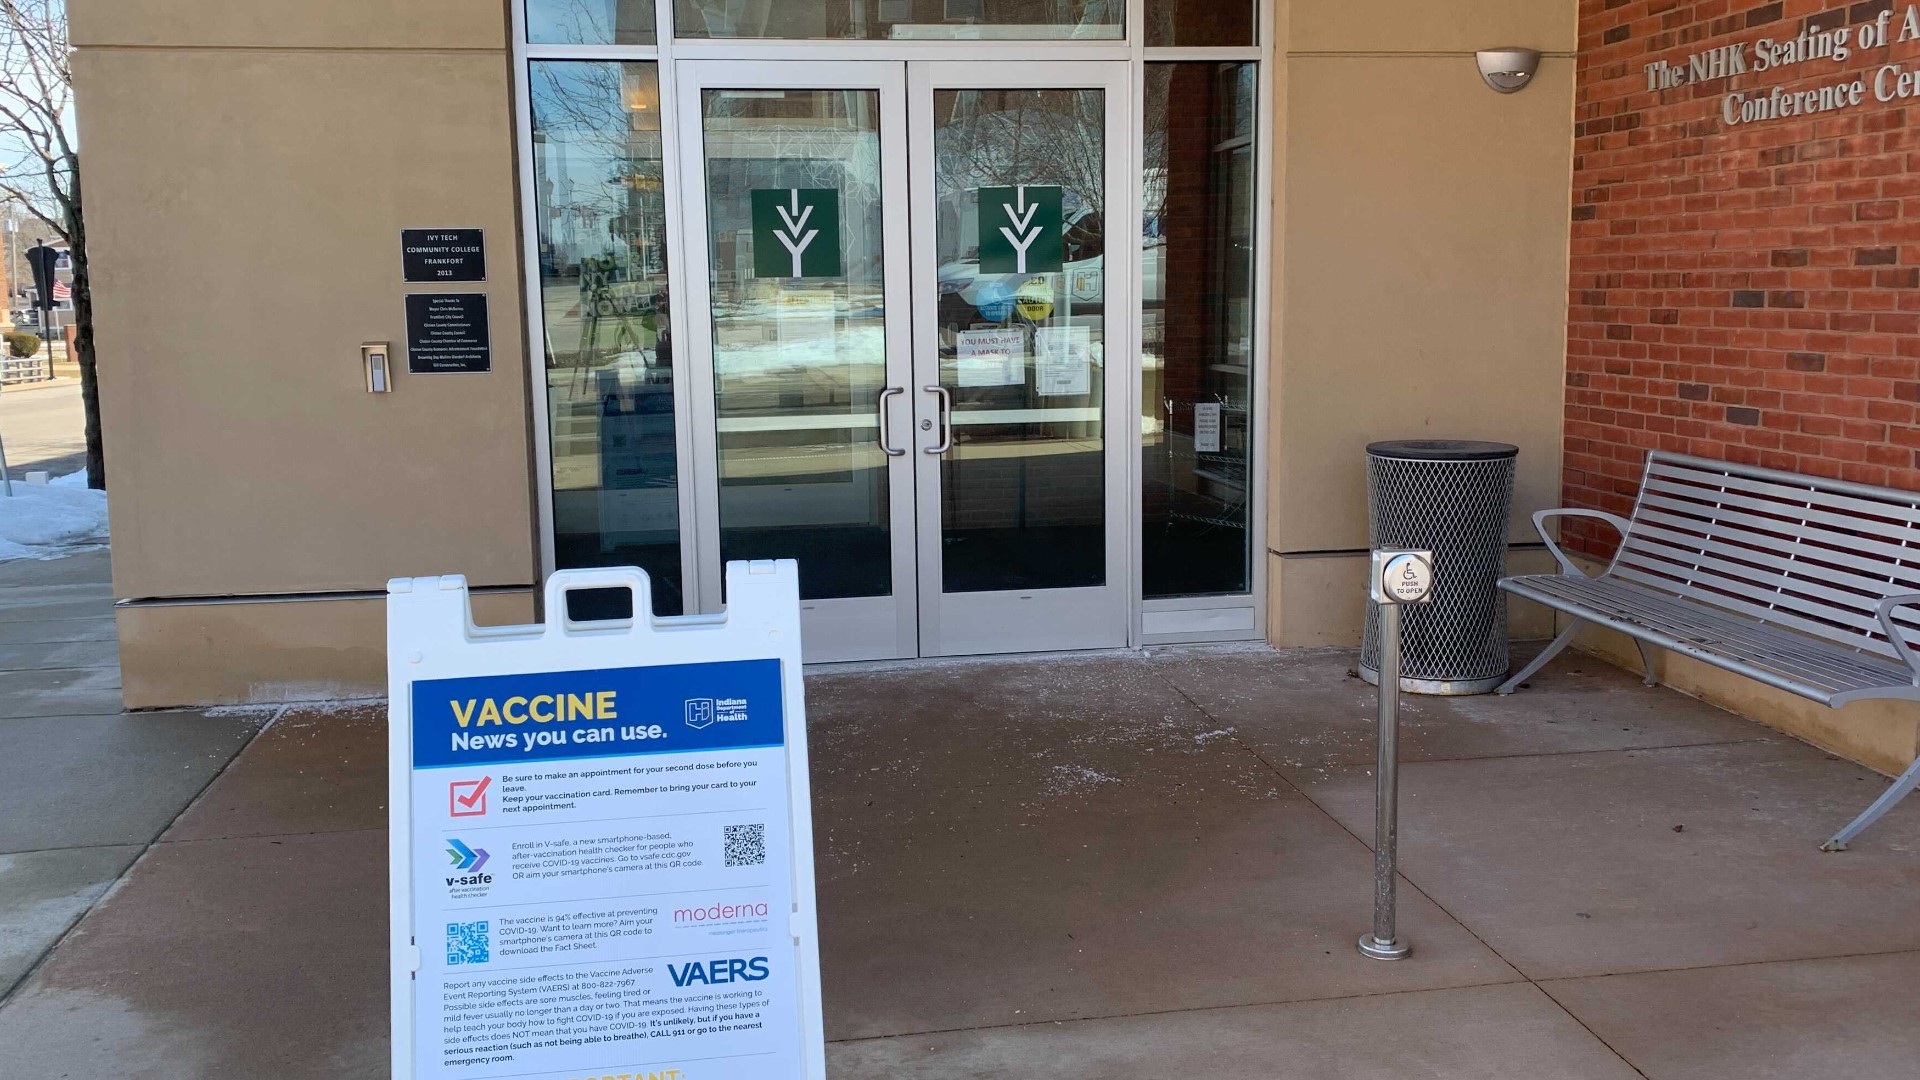 Ten new vaccine clinics opened recently, aiming to improve access to Hoosiers.